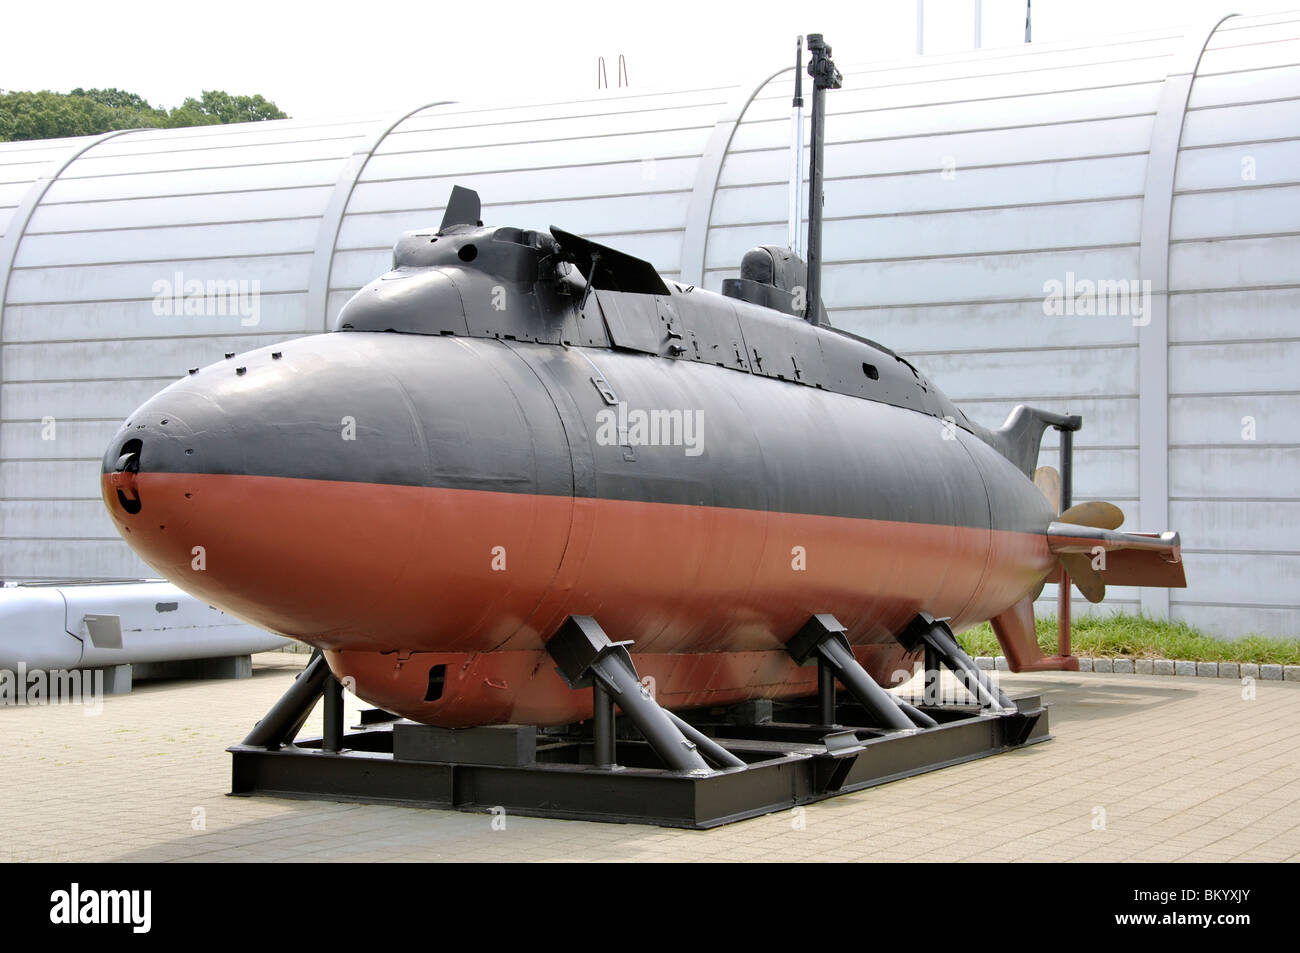 USS Nautilus - the 1st U.S. nuclear submarine at The Submarine Force Museum, Groton, Connecticut, USA Stock Photo